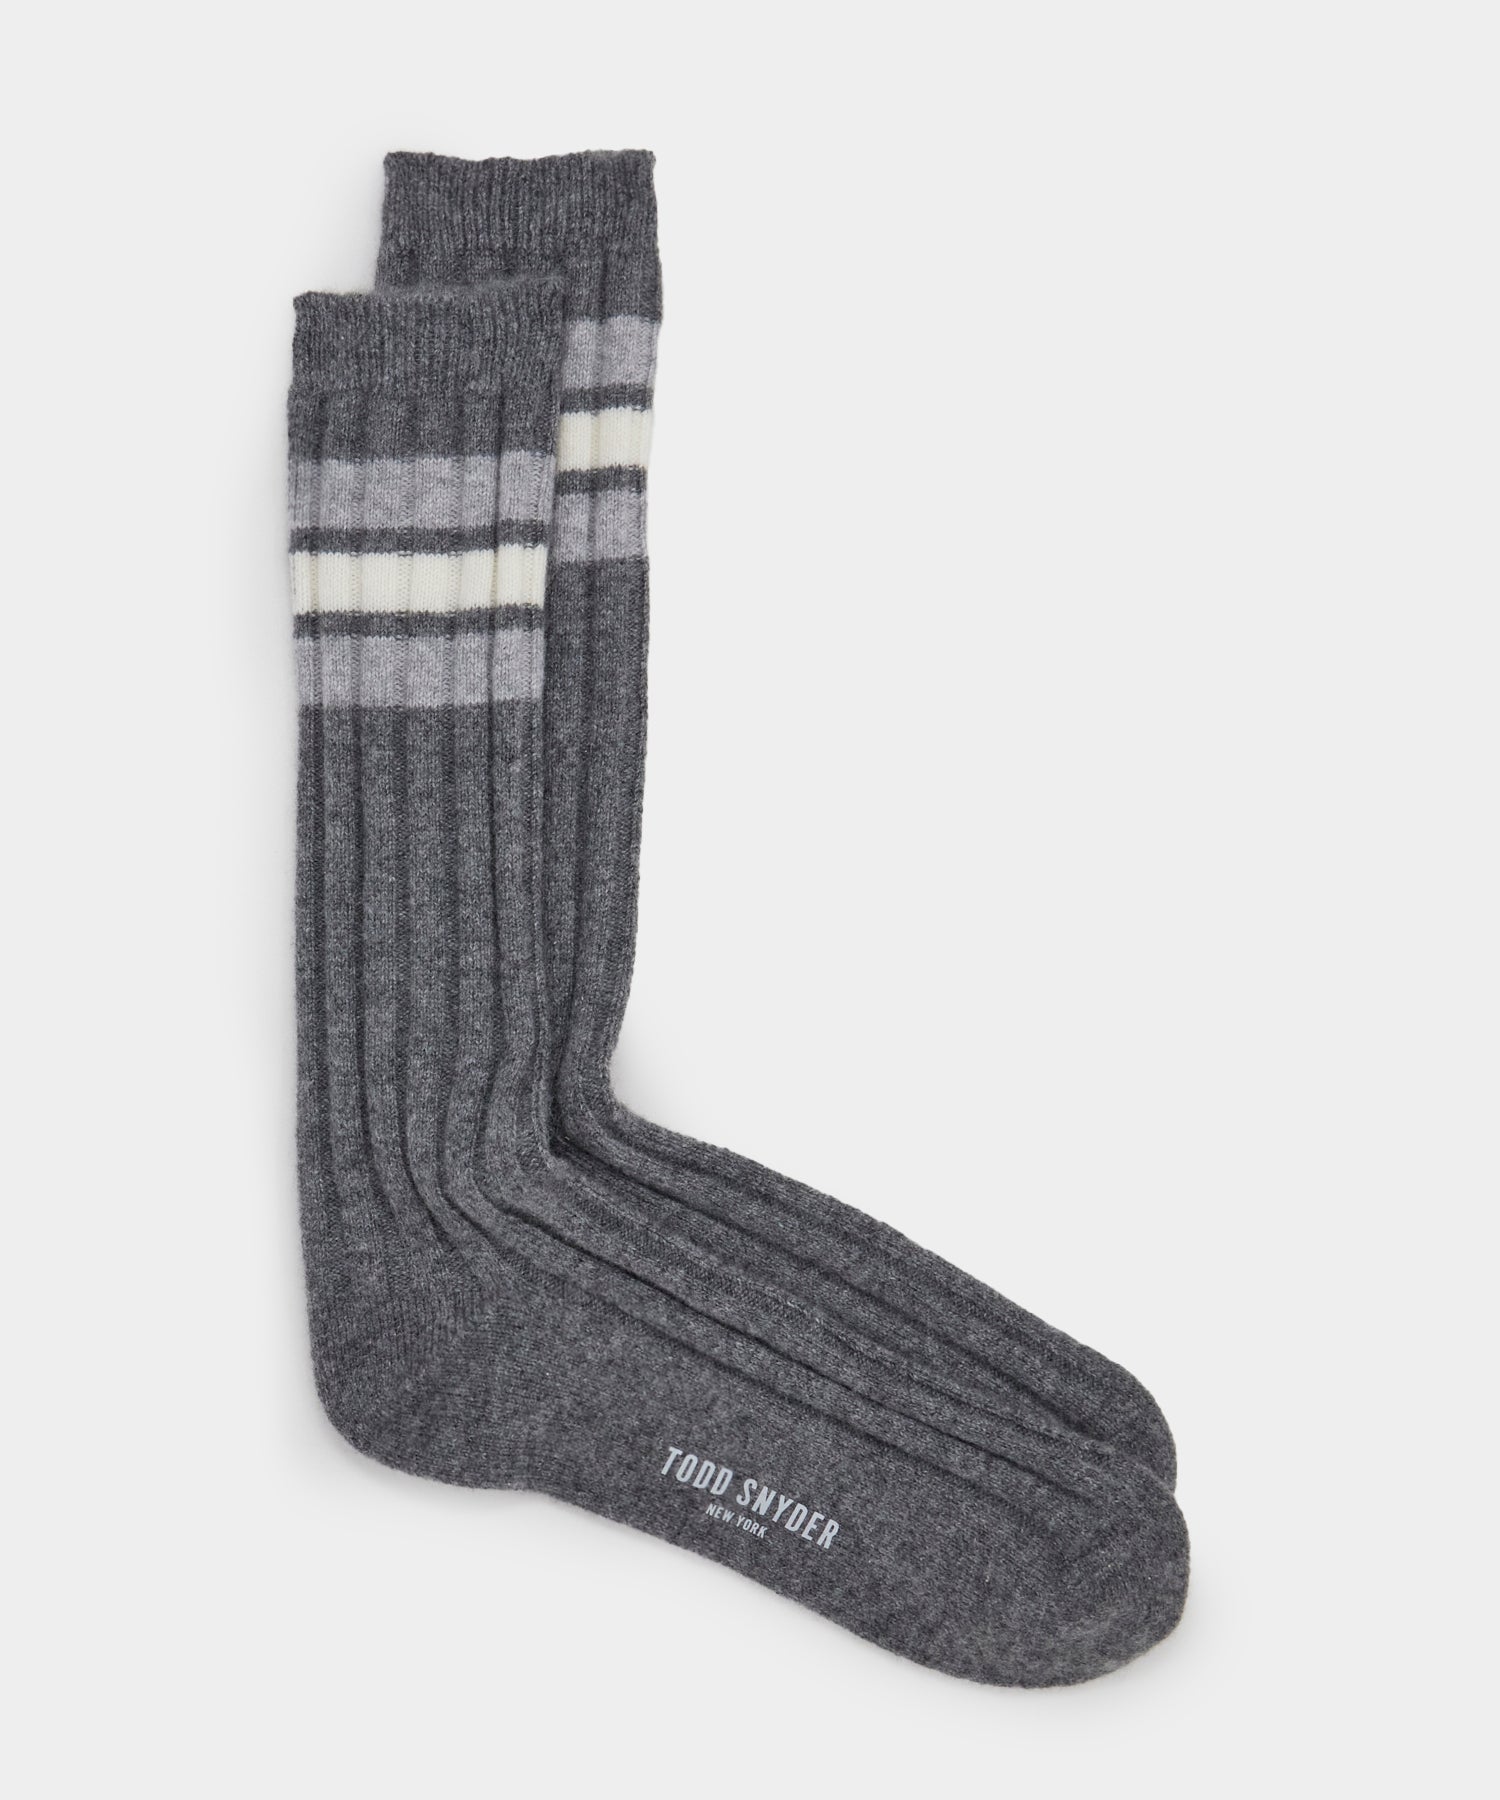 Cashmere Striped Sock in Charcoal Heather